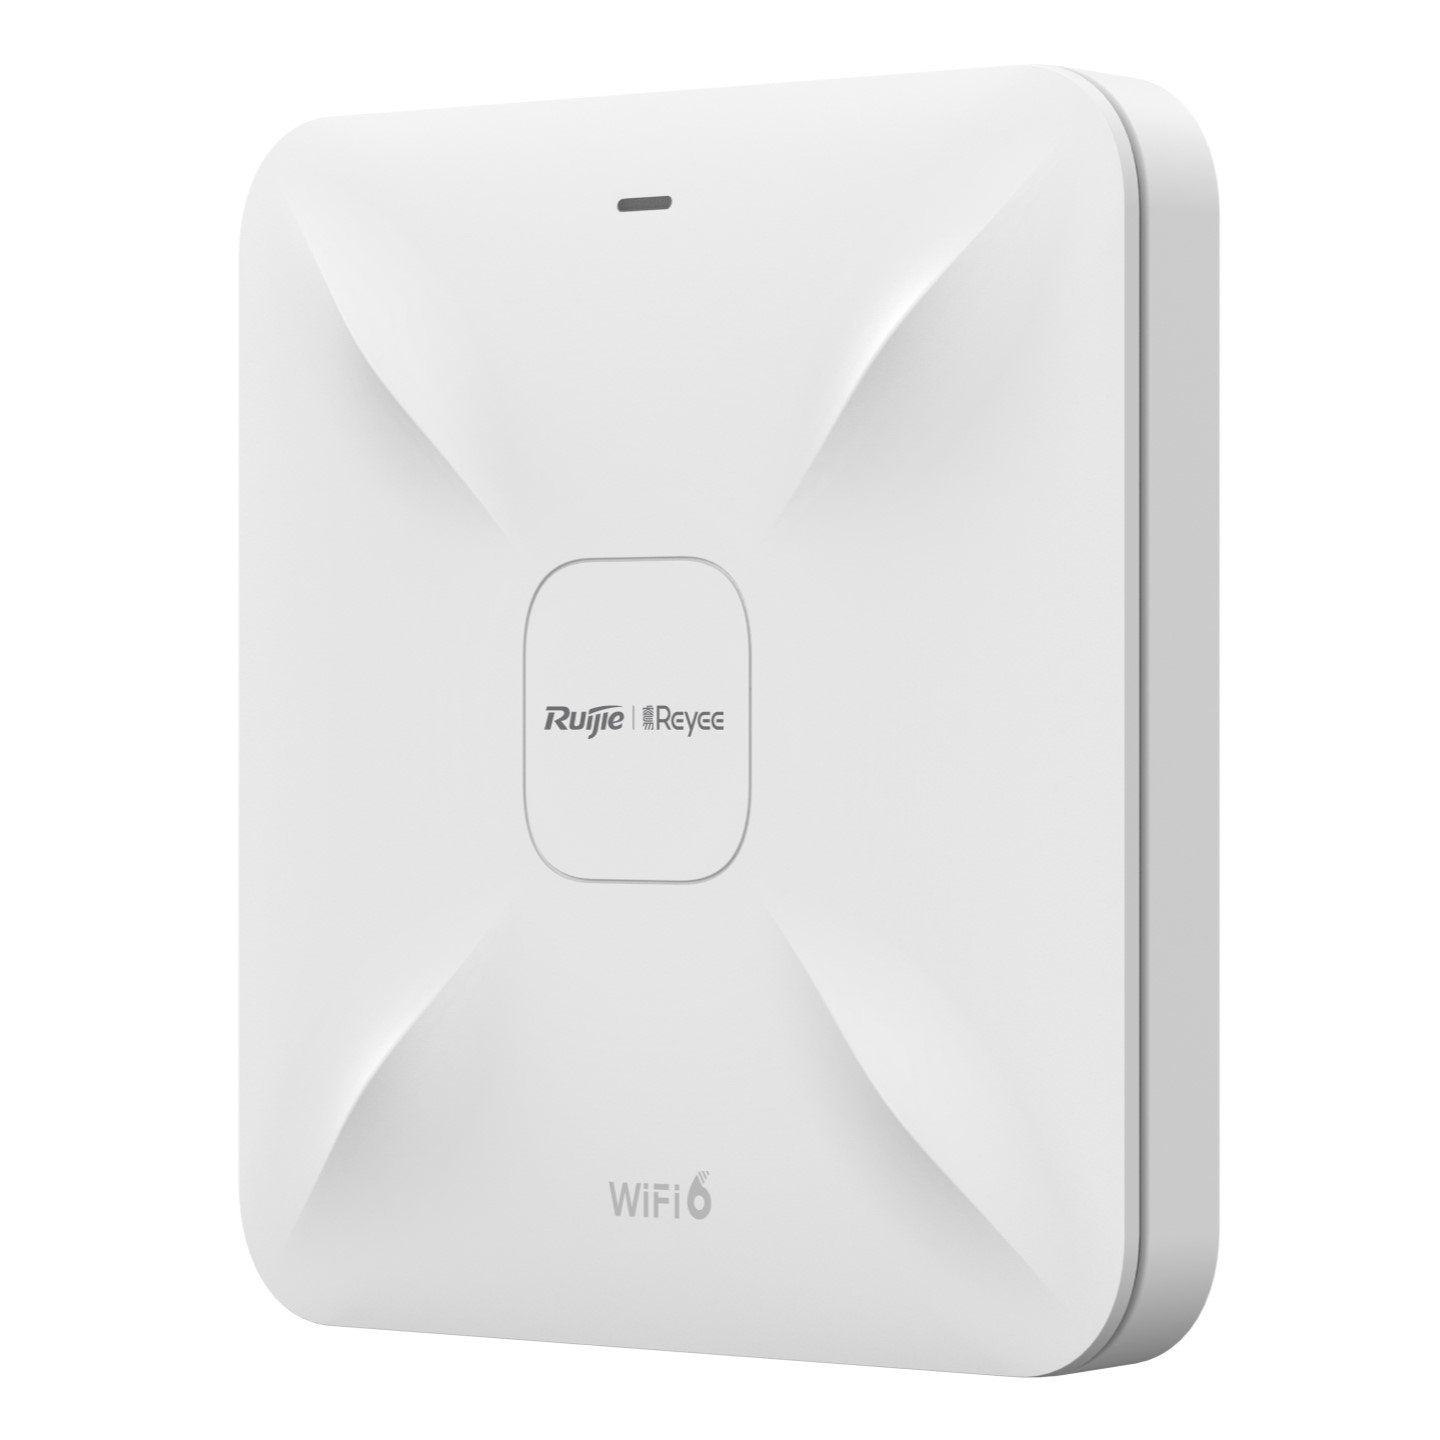 Ruijie* Reyee Internal WiFi6 Gigabit Access Point AX3200, 1770Mbps, Dual Band Up To 3202Mbps, POE / 12VDC (Up To 30M Range)